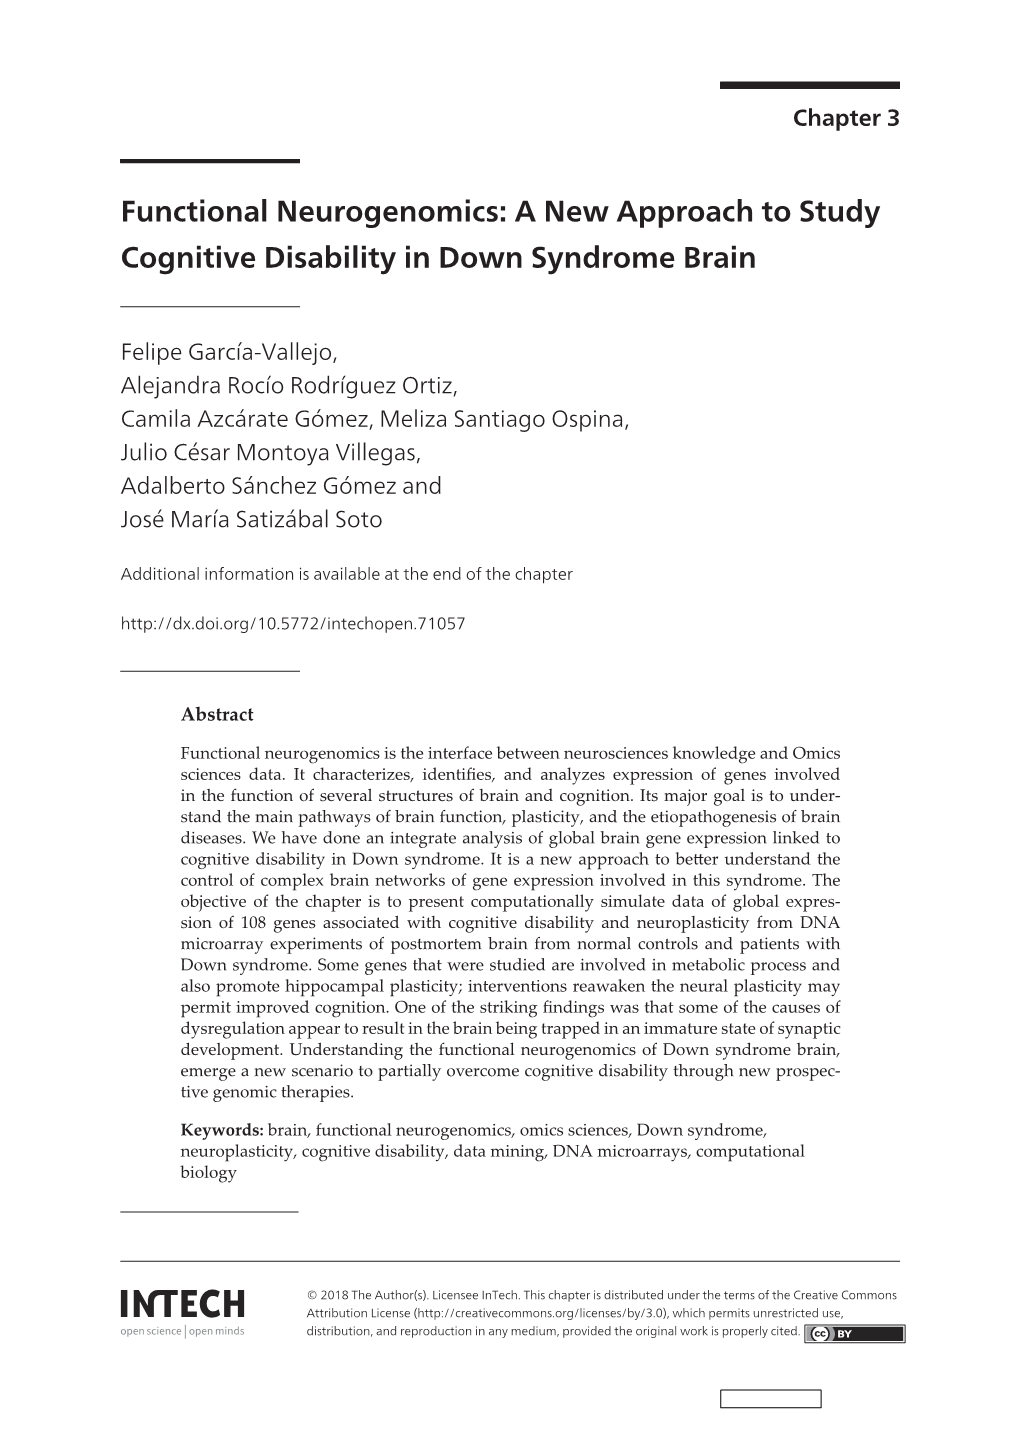 A New Approach to Study Cognitive Disability in Down Syndrome Brain